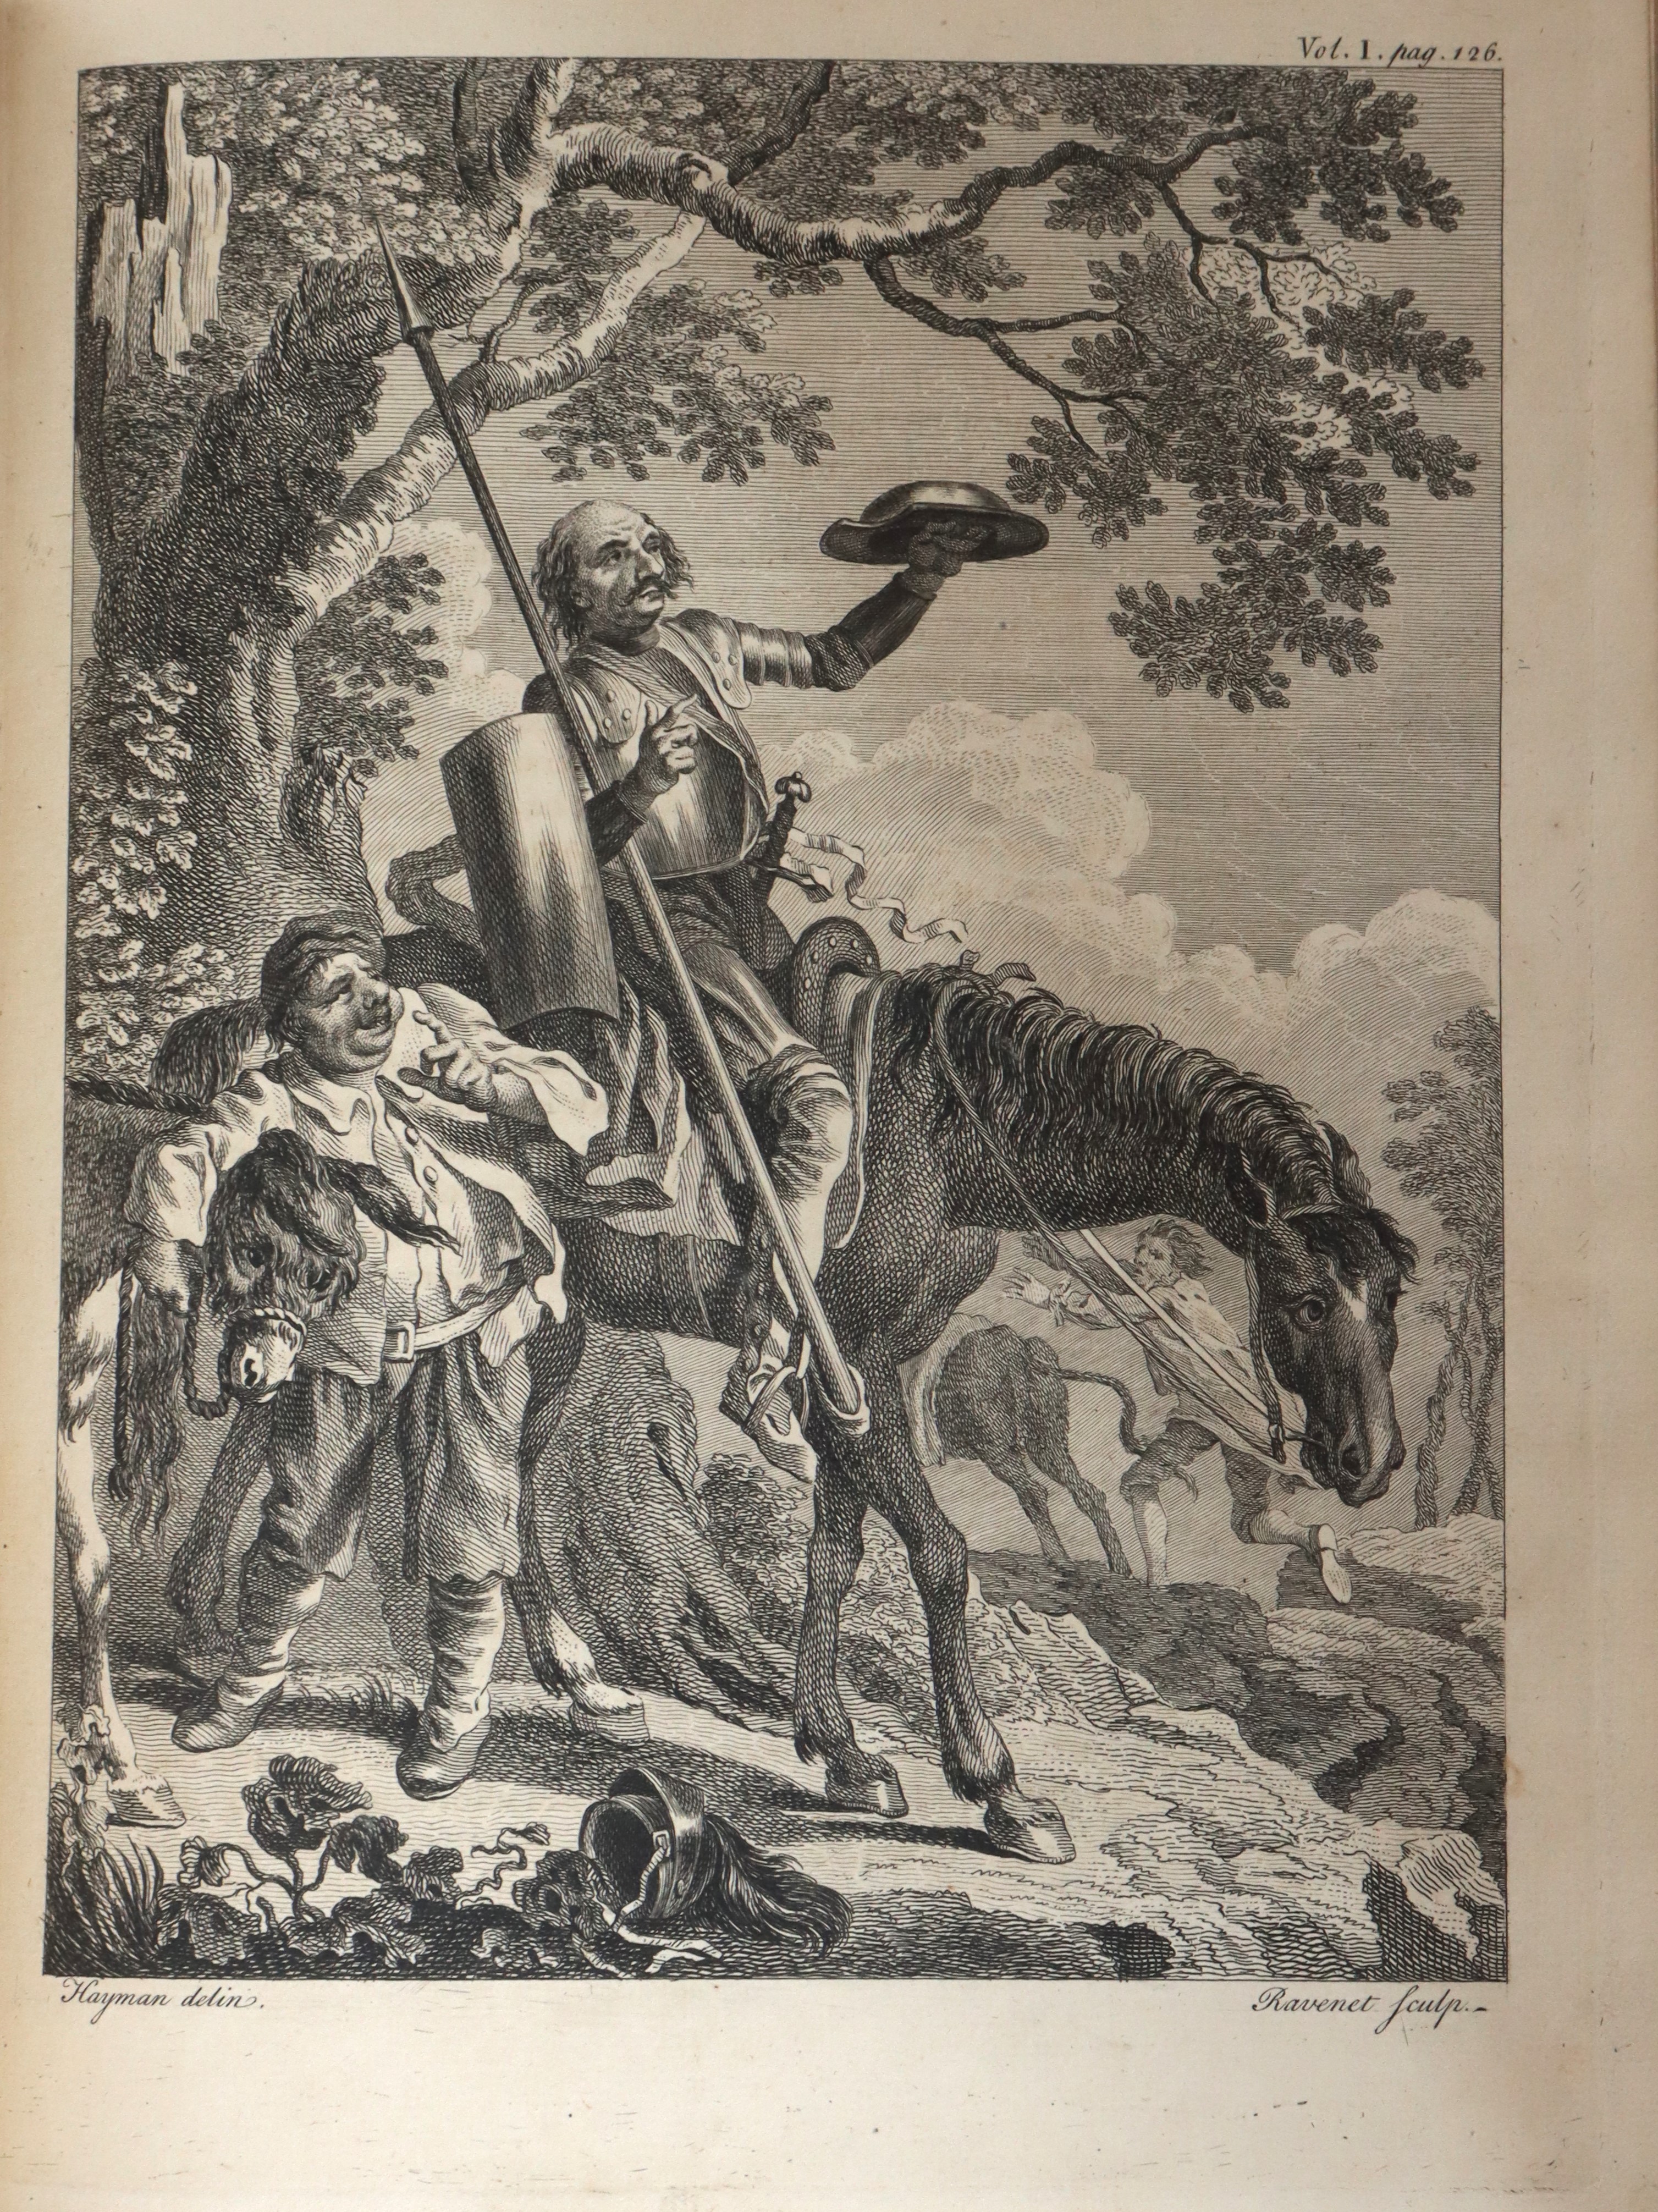 History And Adventures of Don Quixote, Smollett Edition 1755 - Image 8 of 11